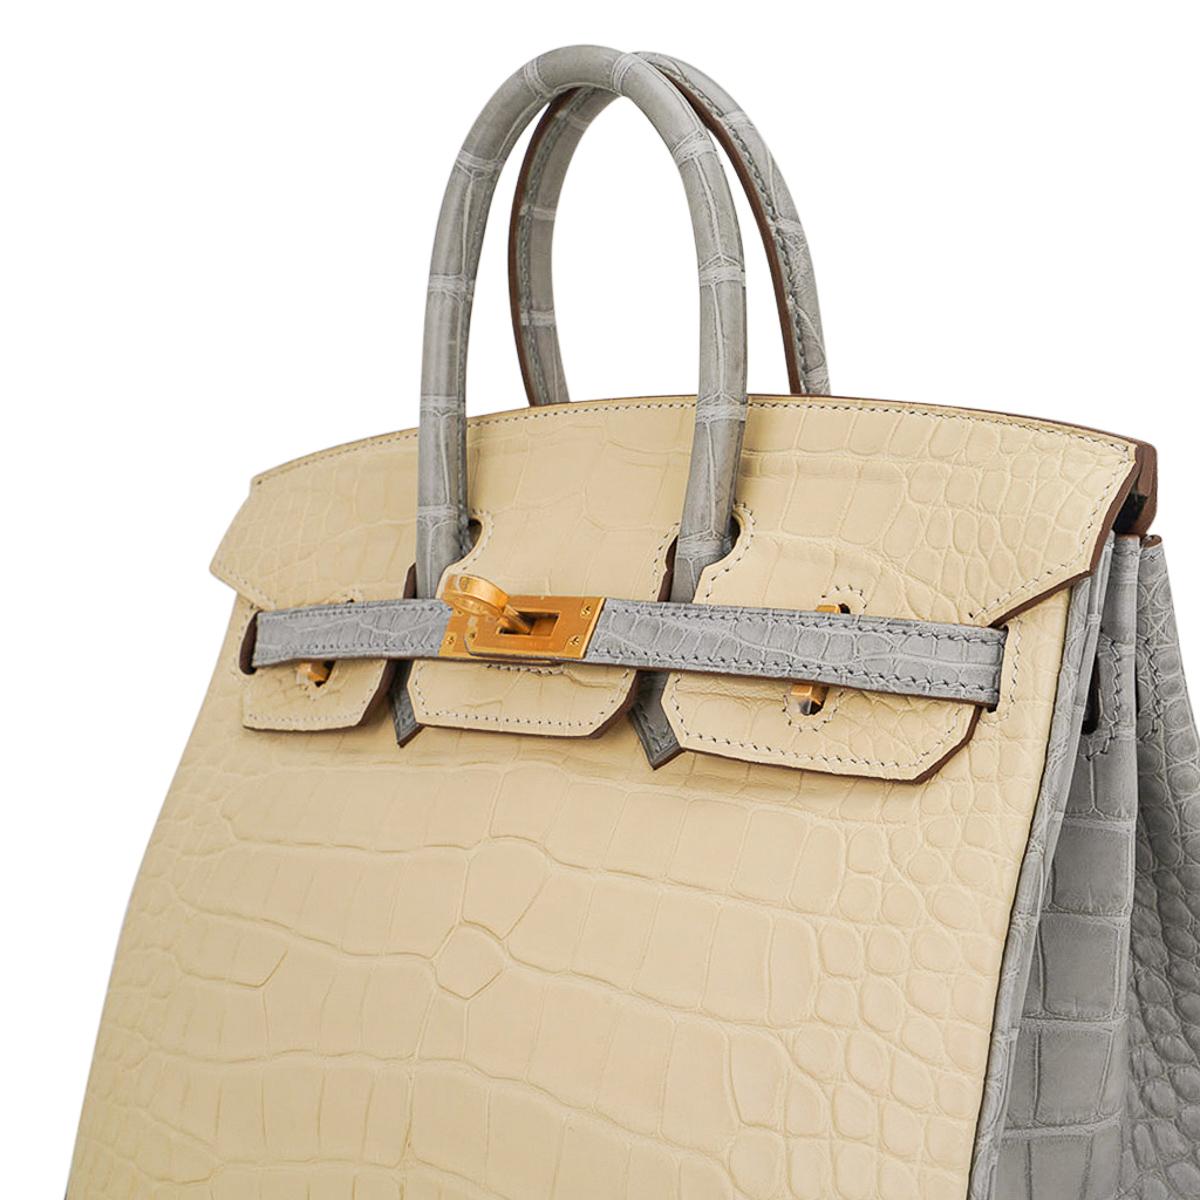 Hermes Birkin HSS 25 Matte Alligator Vanille / Gris Pearl Bag Brushed Gold Hdw In New Condition For Sale In Miami, FL